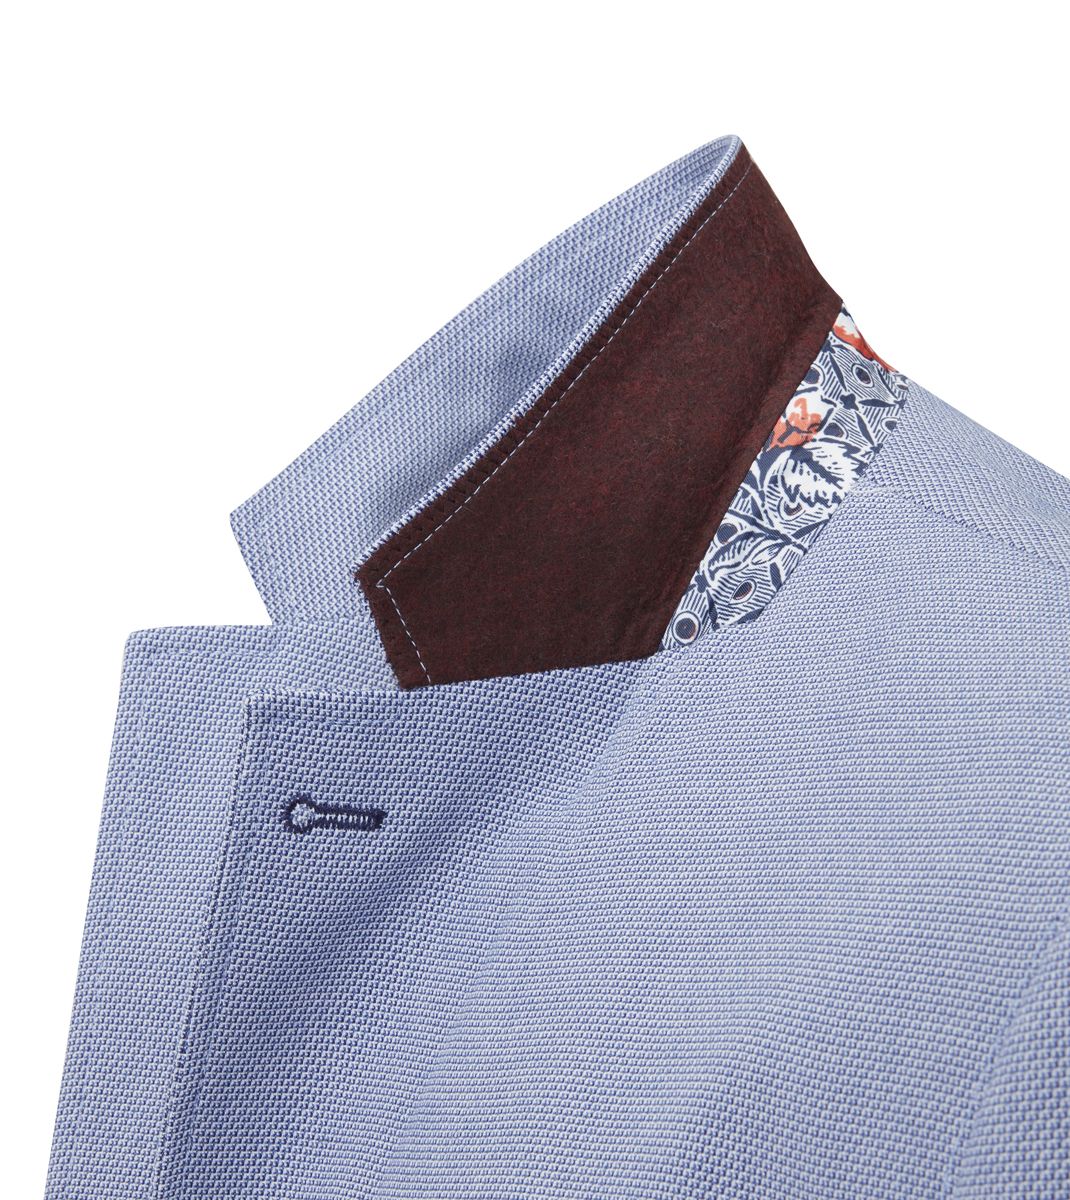 Harry Light Blue Tapered Fit Blazer-Collar detail view